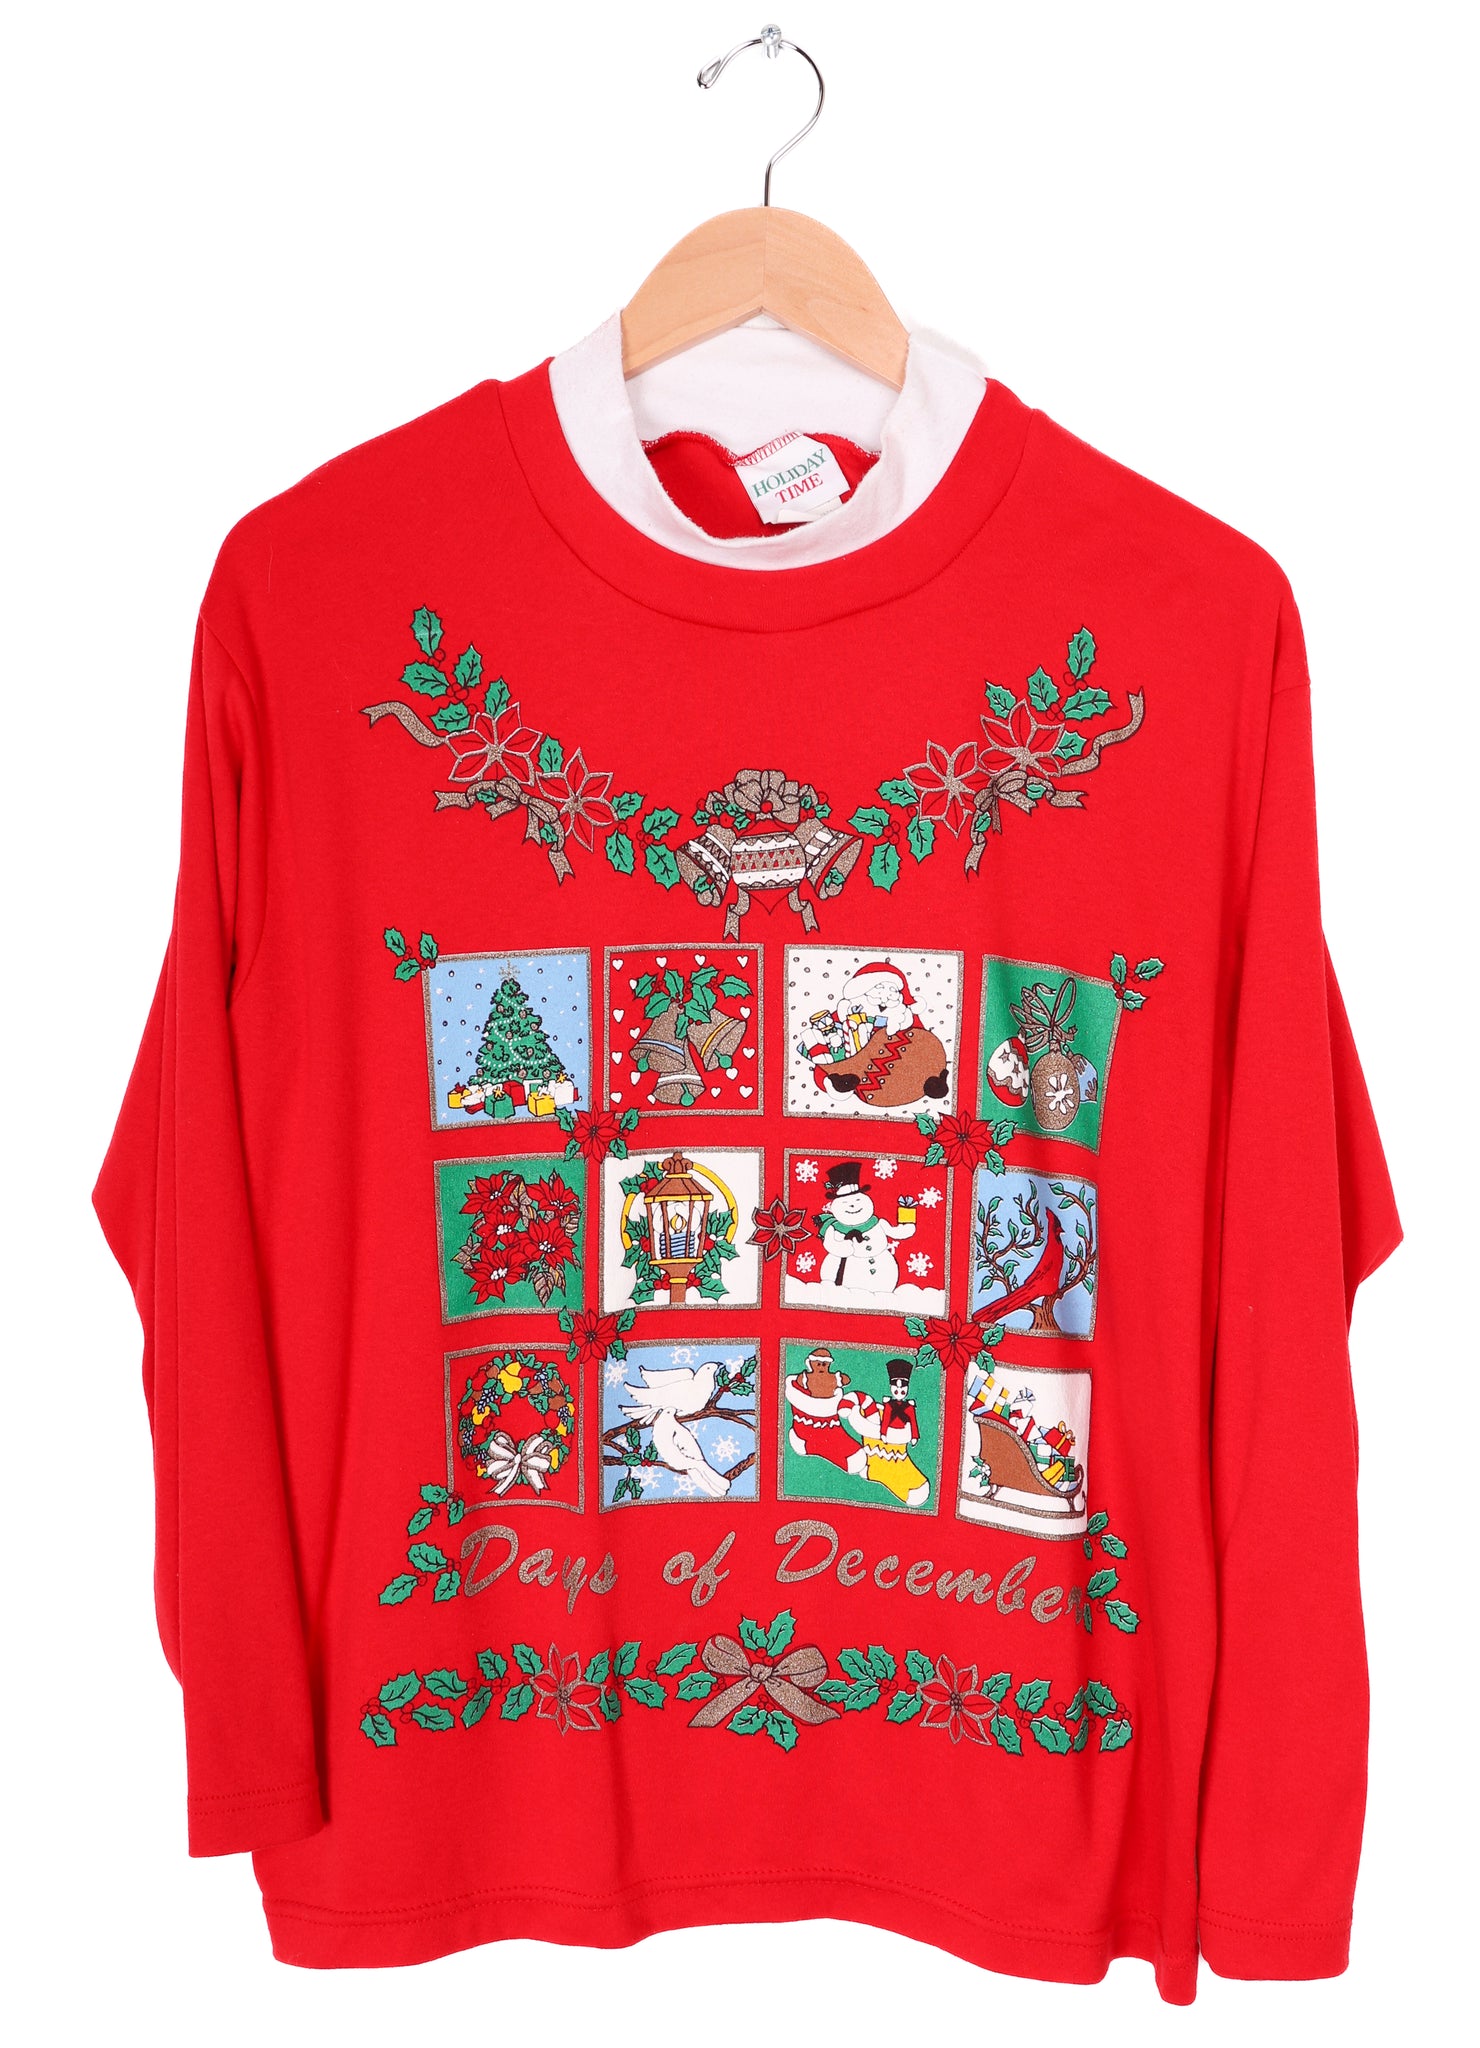 90s Holiday Time Days of December Christmas Sweater